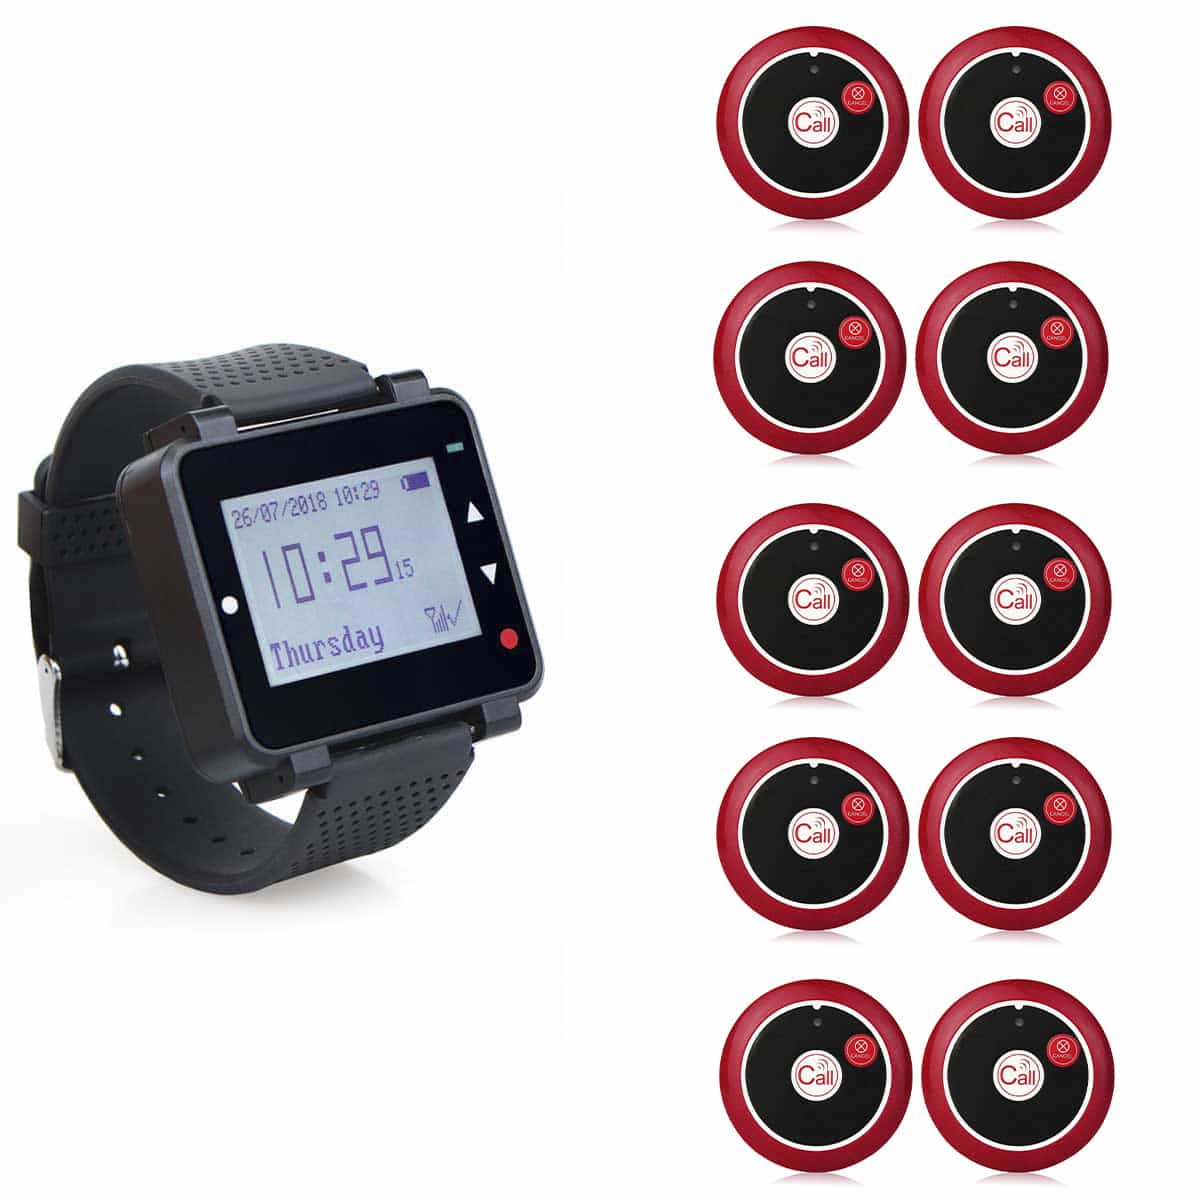 retekess wireless calling receiver t128 watch pager td008 call button 10pcs